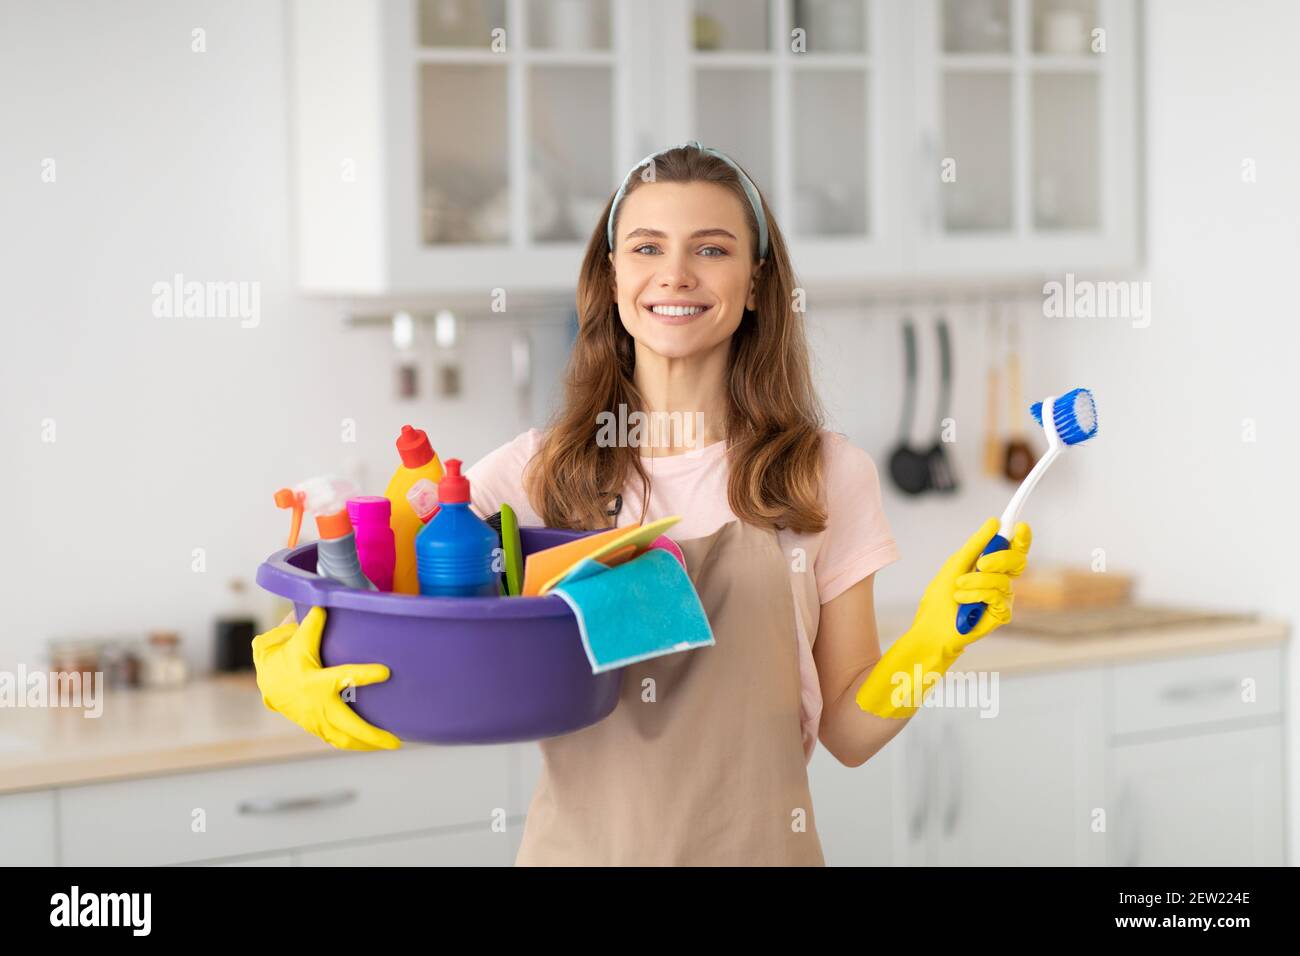 Cleaning Supplies Happy Portrait Woman Housekeeping Cleaning